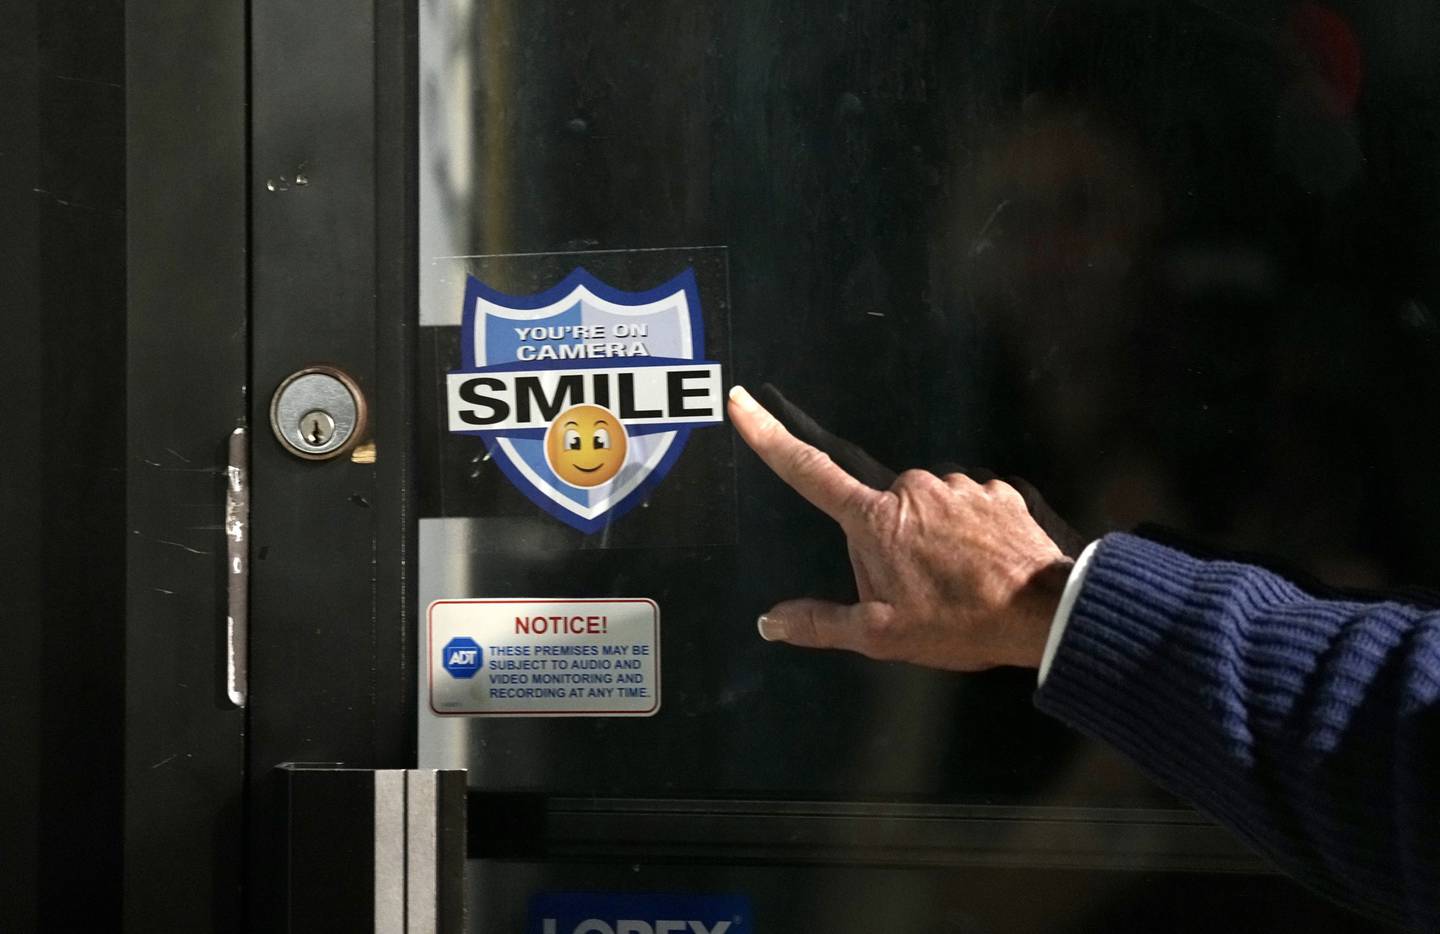 Towson Chamber of Commerce Executive Director Nancy Hafford points at a security sticker on a business door during a public safety walk down York Road and Allegheny Avenue, visiting businesses along the way on February 22, 2023.